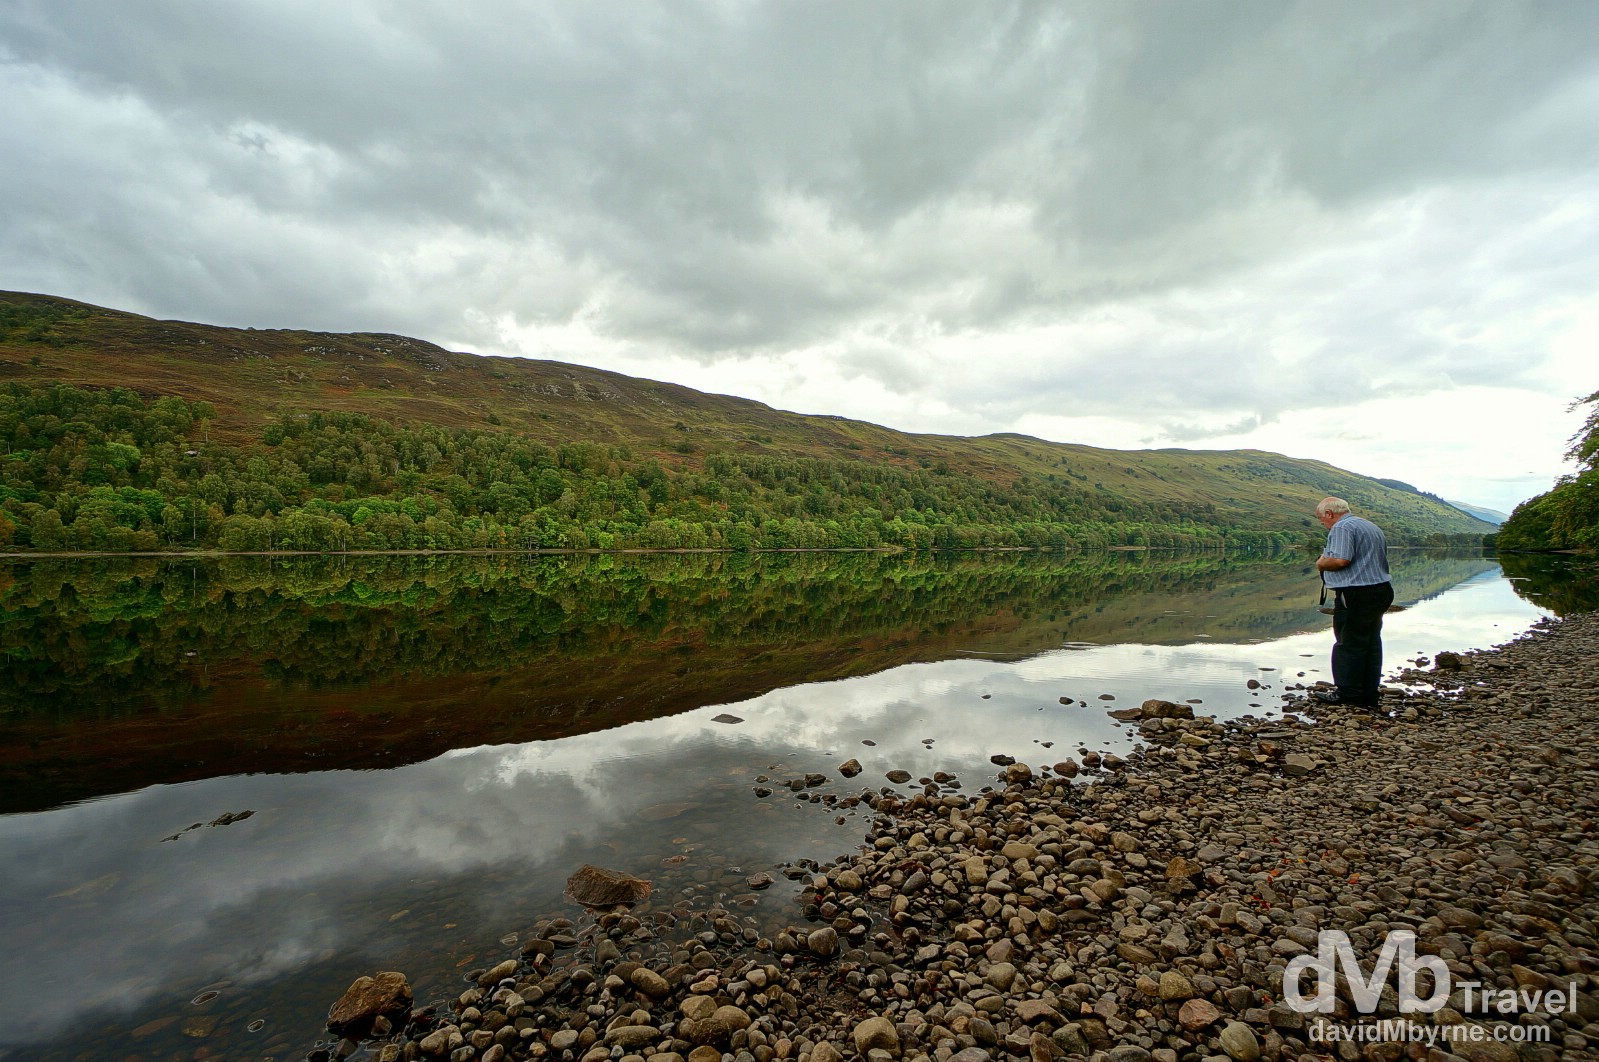 Admiring the reflections of Loch Oich in Highland, Scotland. September 16, 2014.